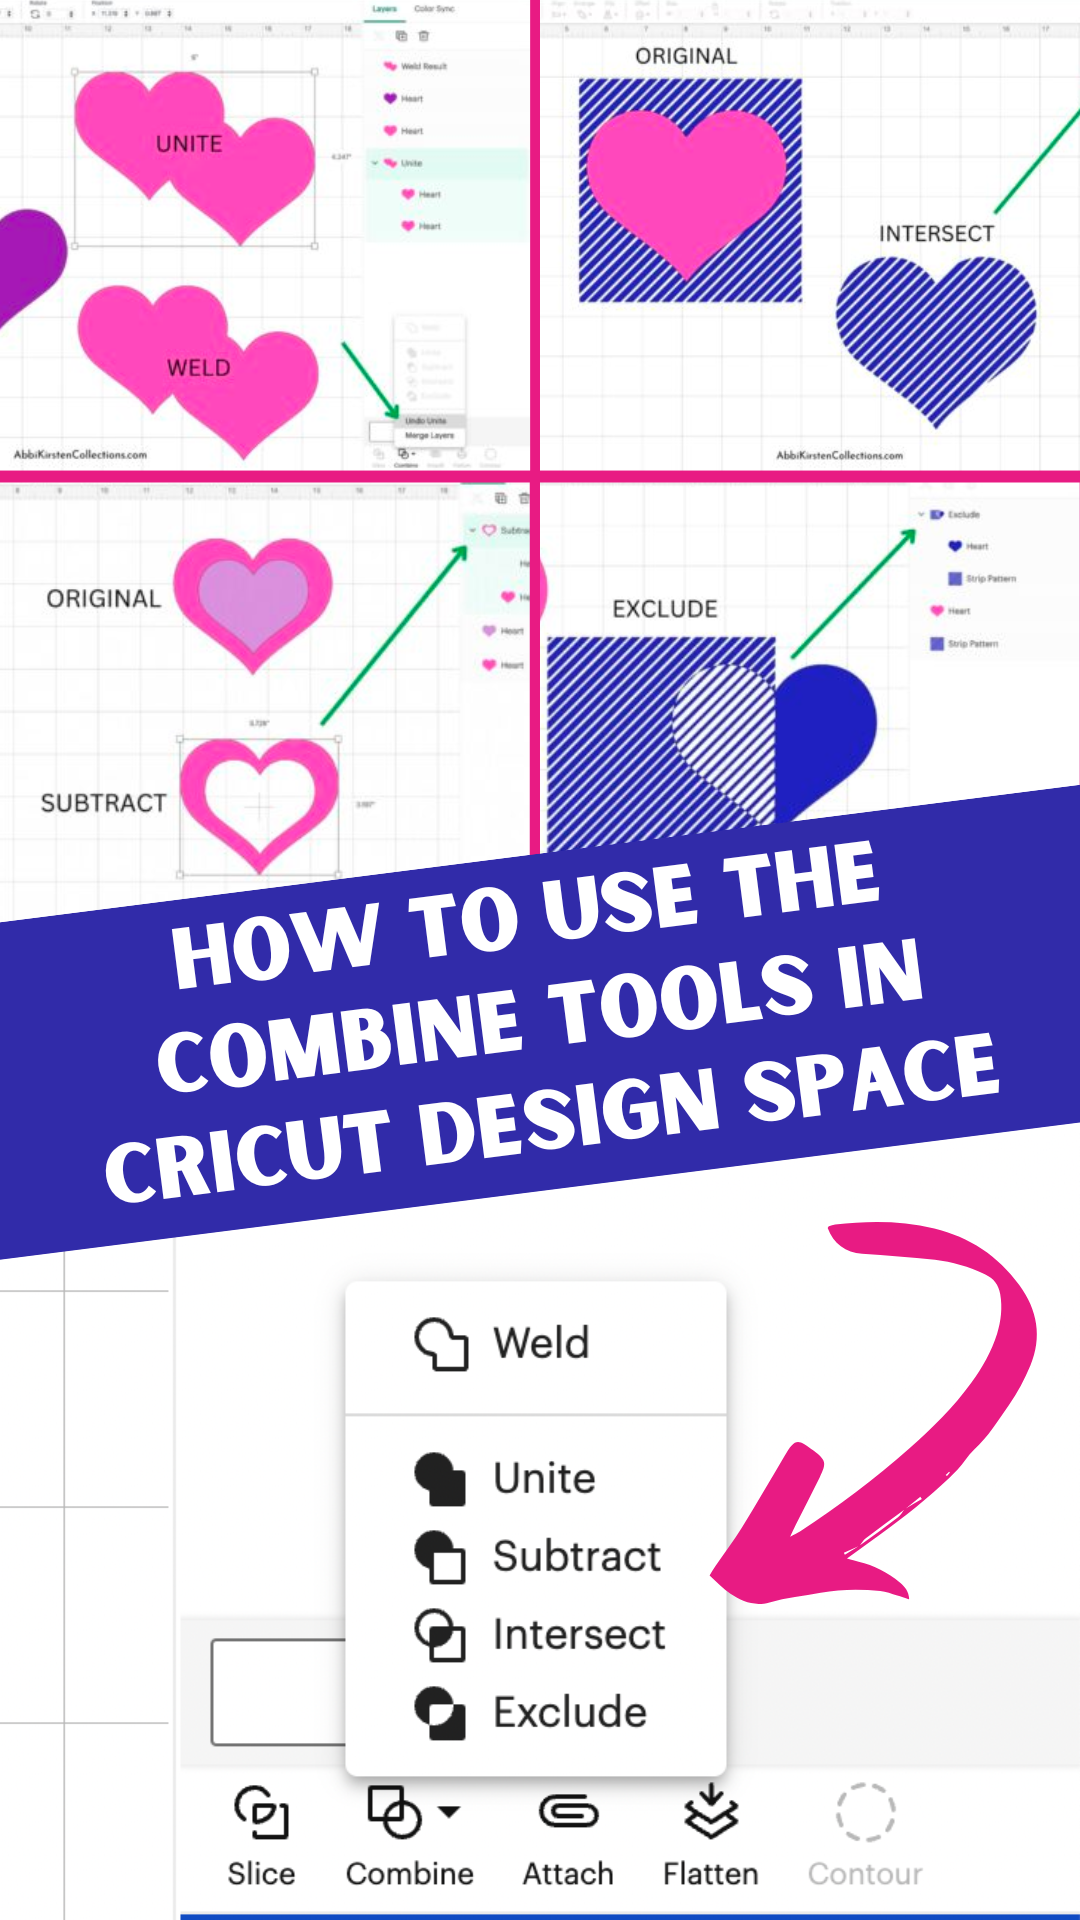 How do I use the Contour function in Design Space? – Help Center